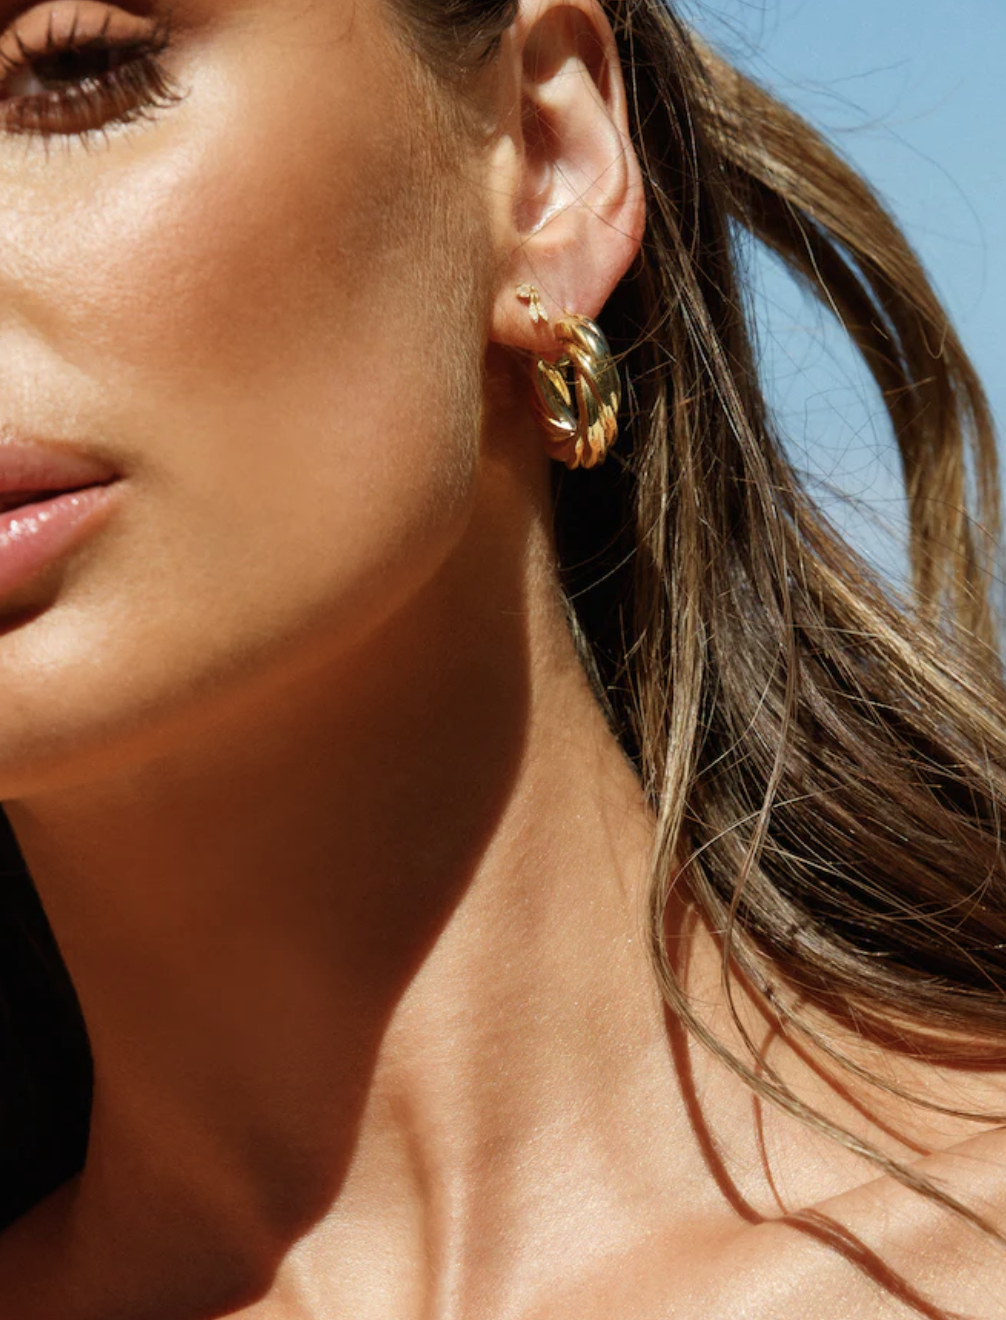 Close-up of a person wearing a hoop earring, focusing on the ear, cheek, and hair